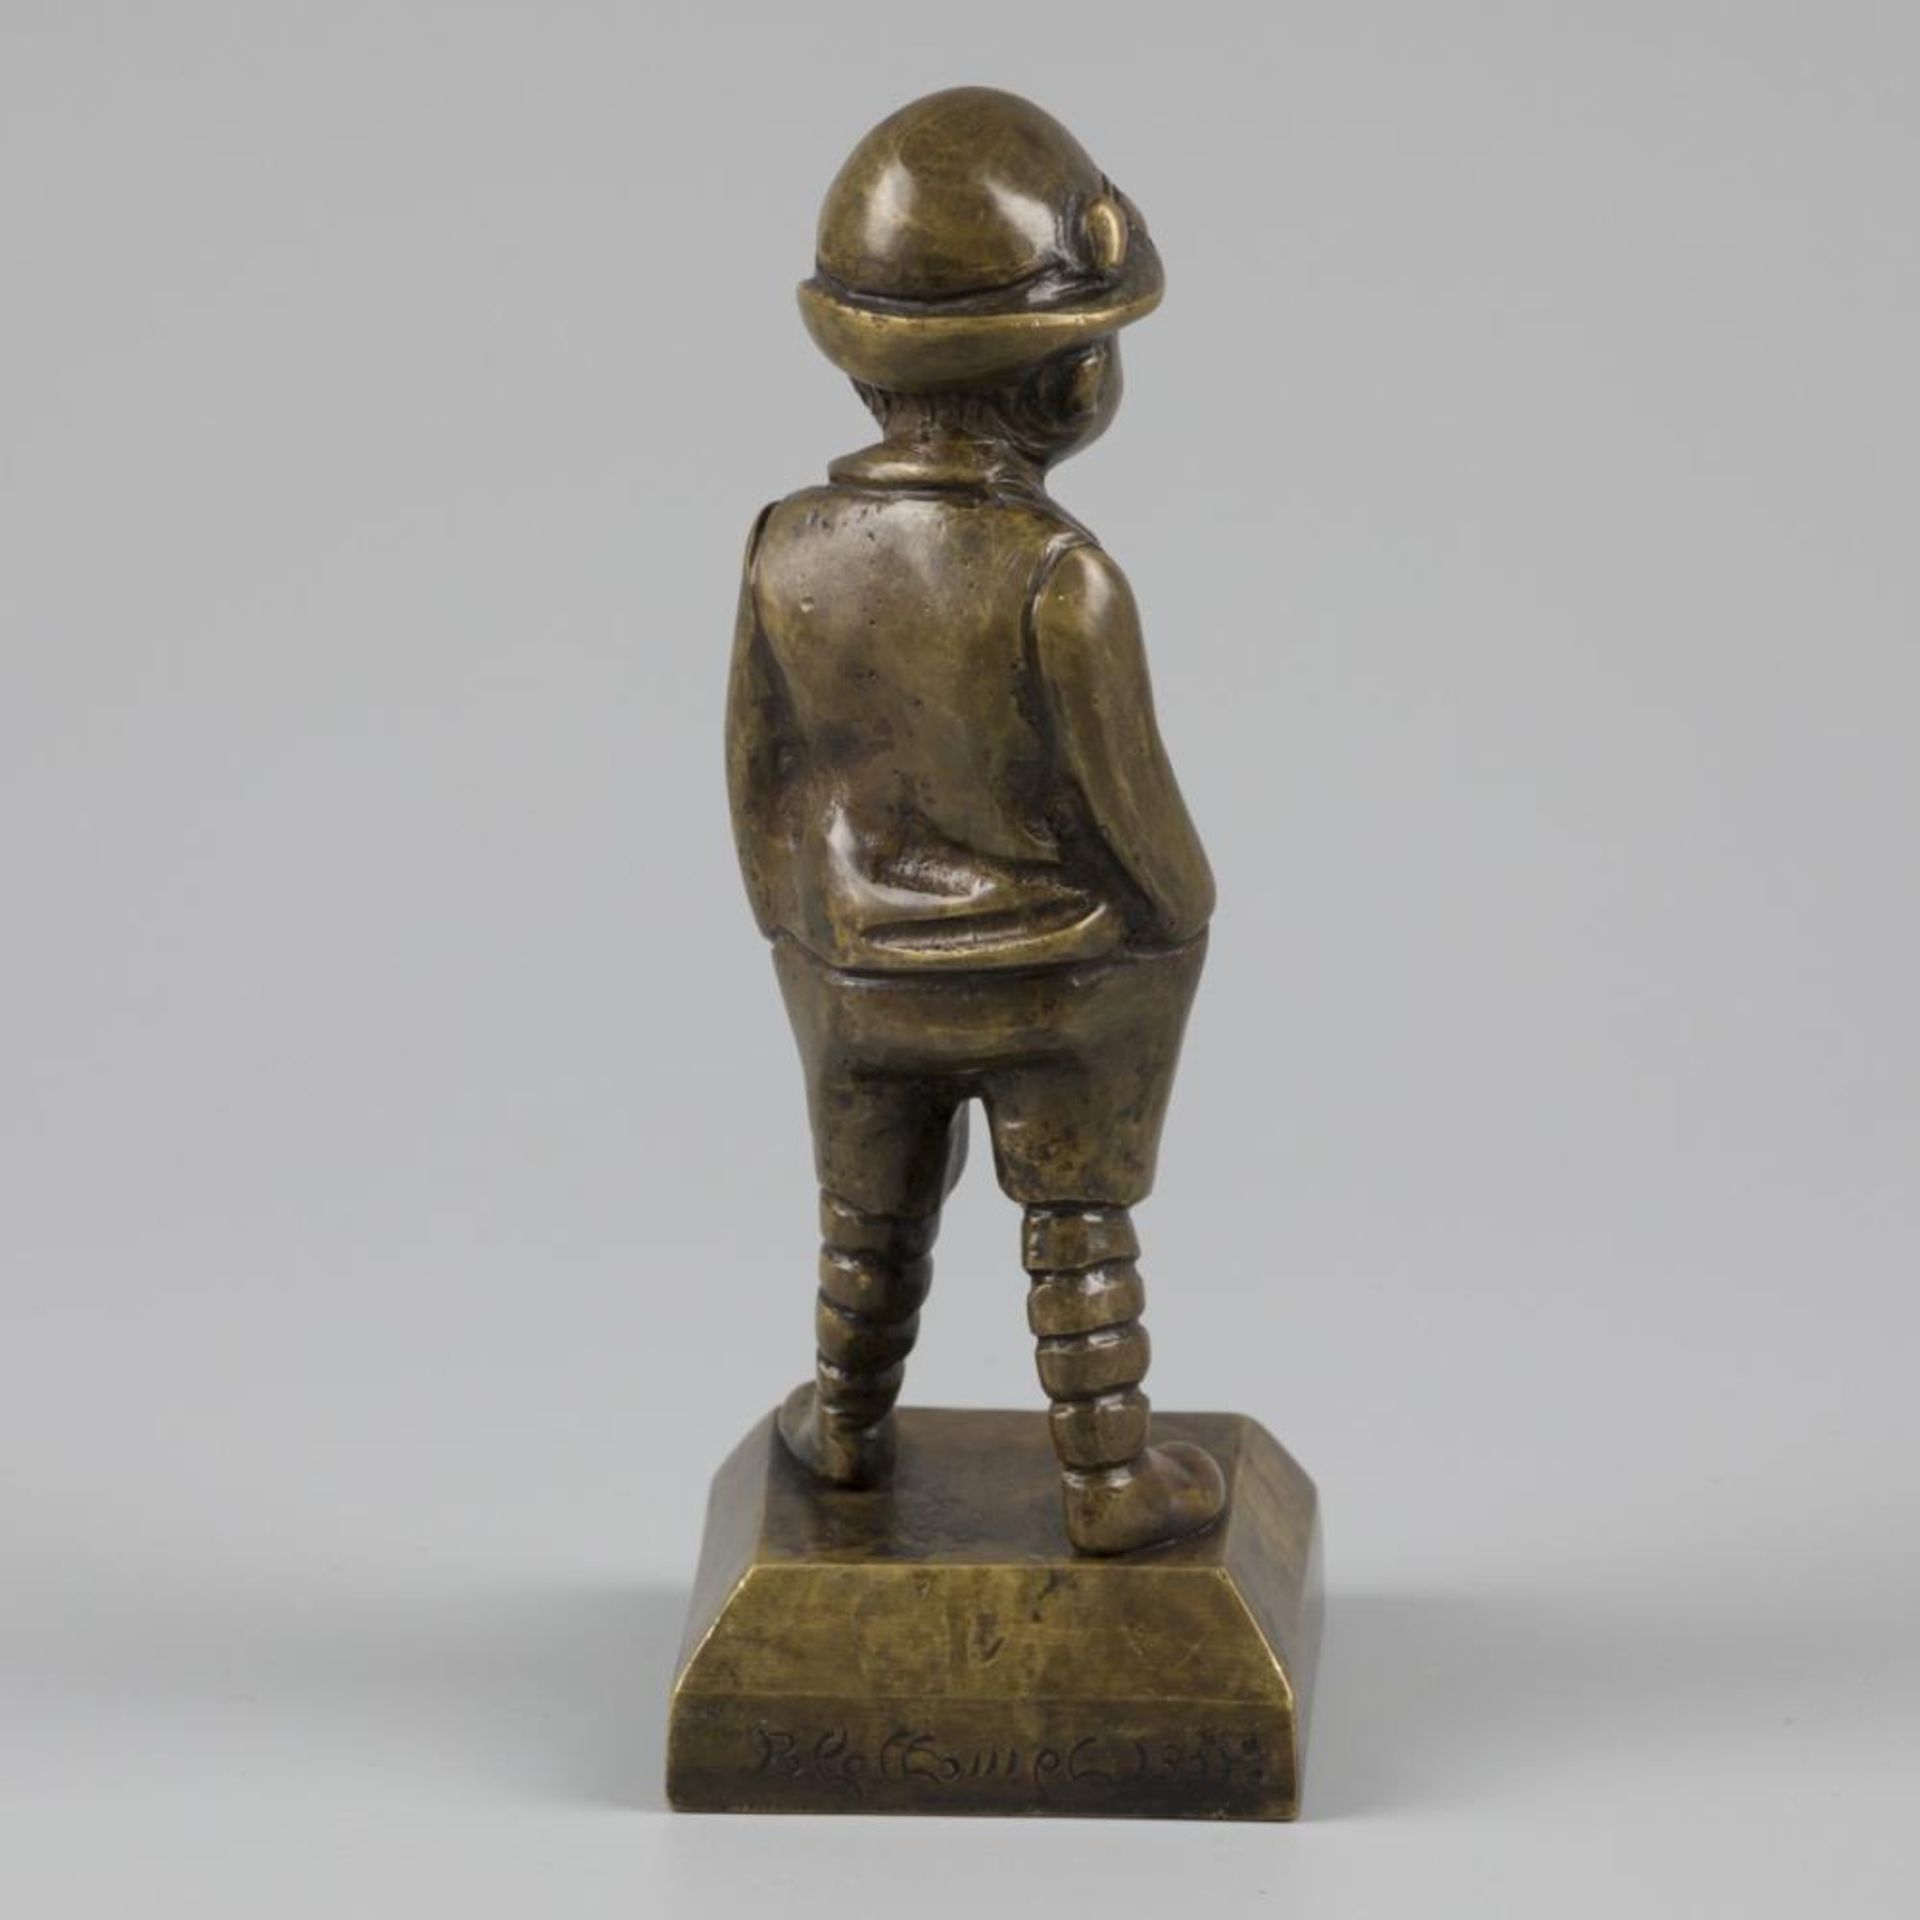 A bronze sculpture of a toddler with his hands in his pockets, Belgium, ca. 1920. - Image 4 of 6